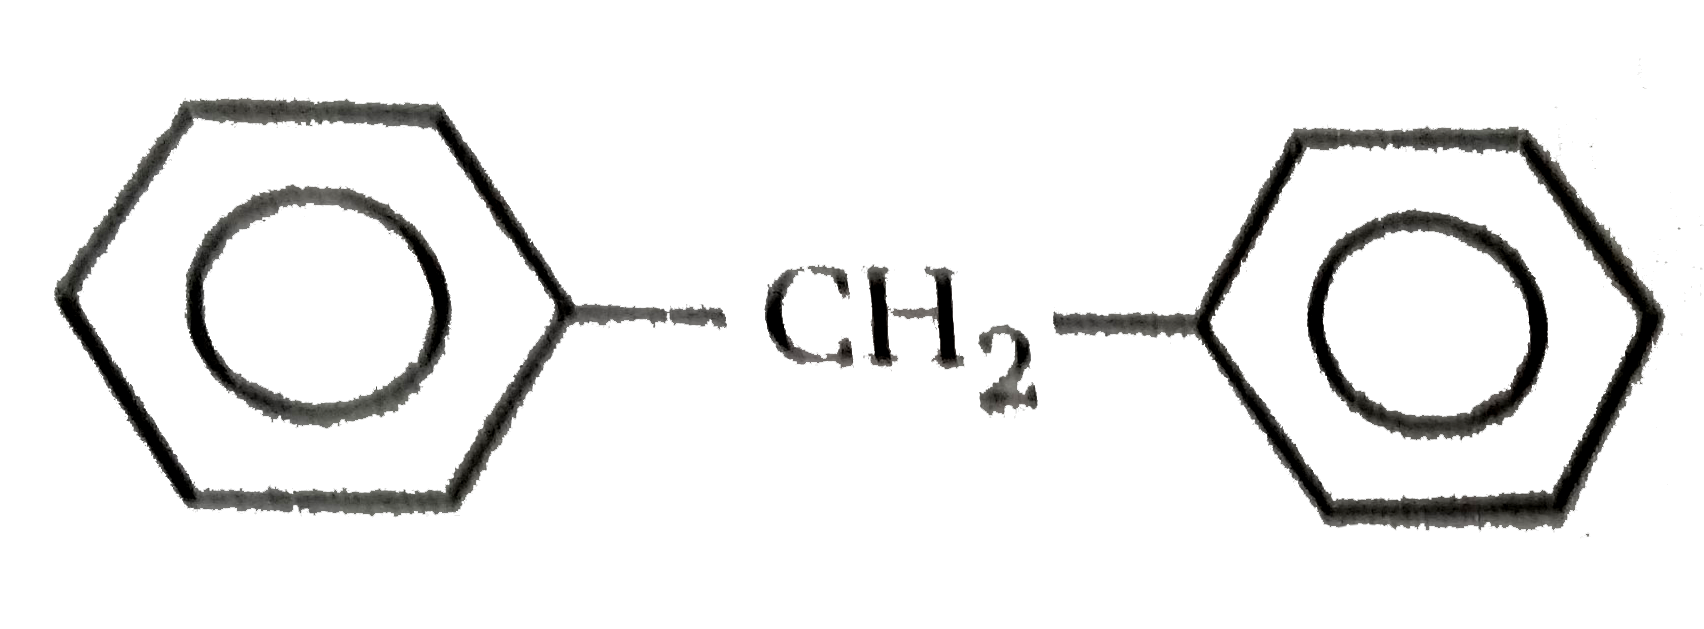 The molecular formula of diphenylmethane,      How many structural isomers are possible when one of the hydrogen is replaced by a  chlorine atom ?